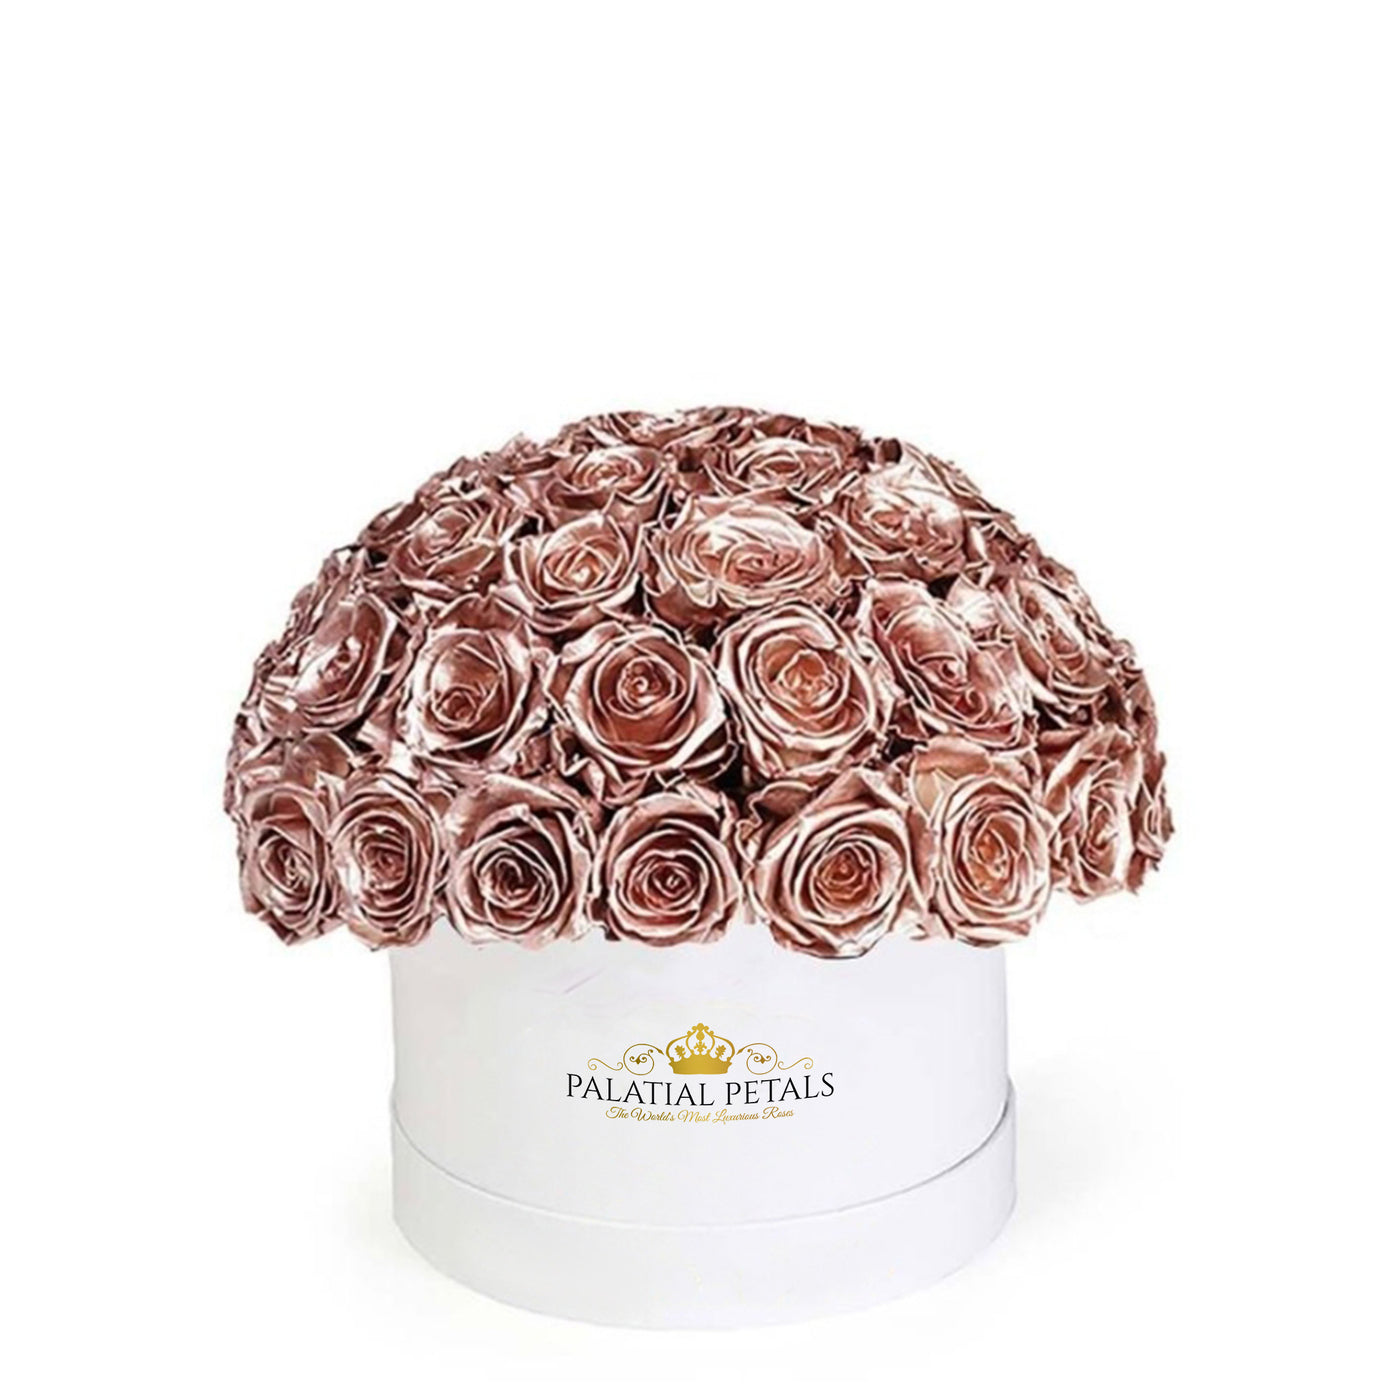 24k Gold Roses That Last A Year - Classic "Crown"